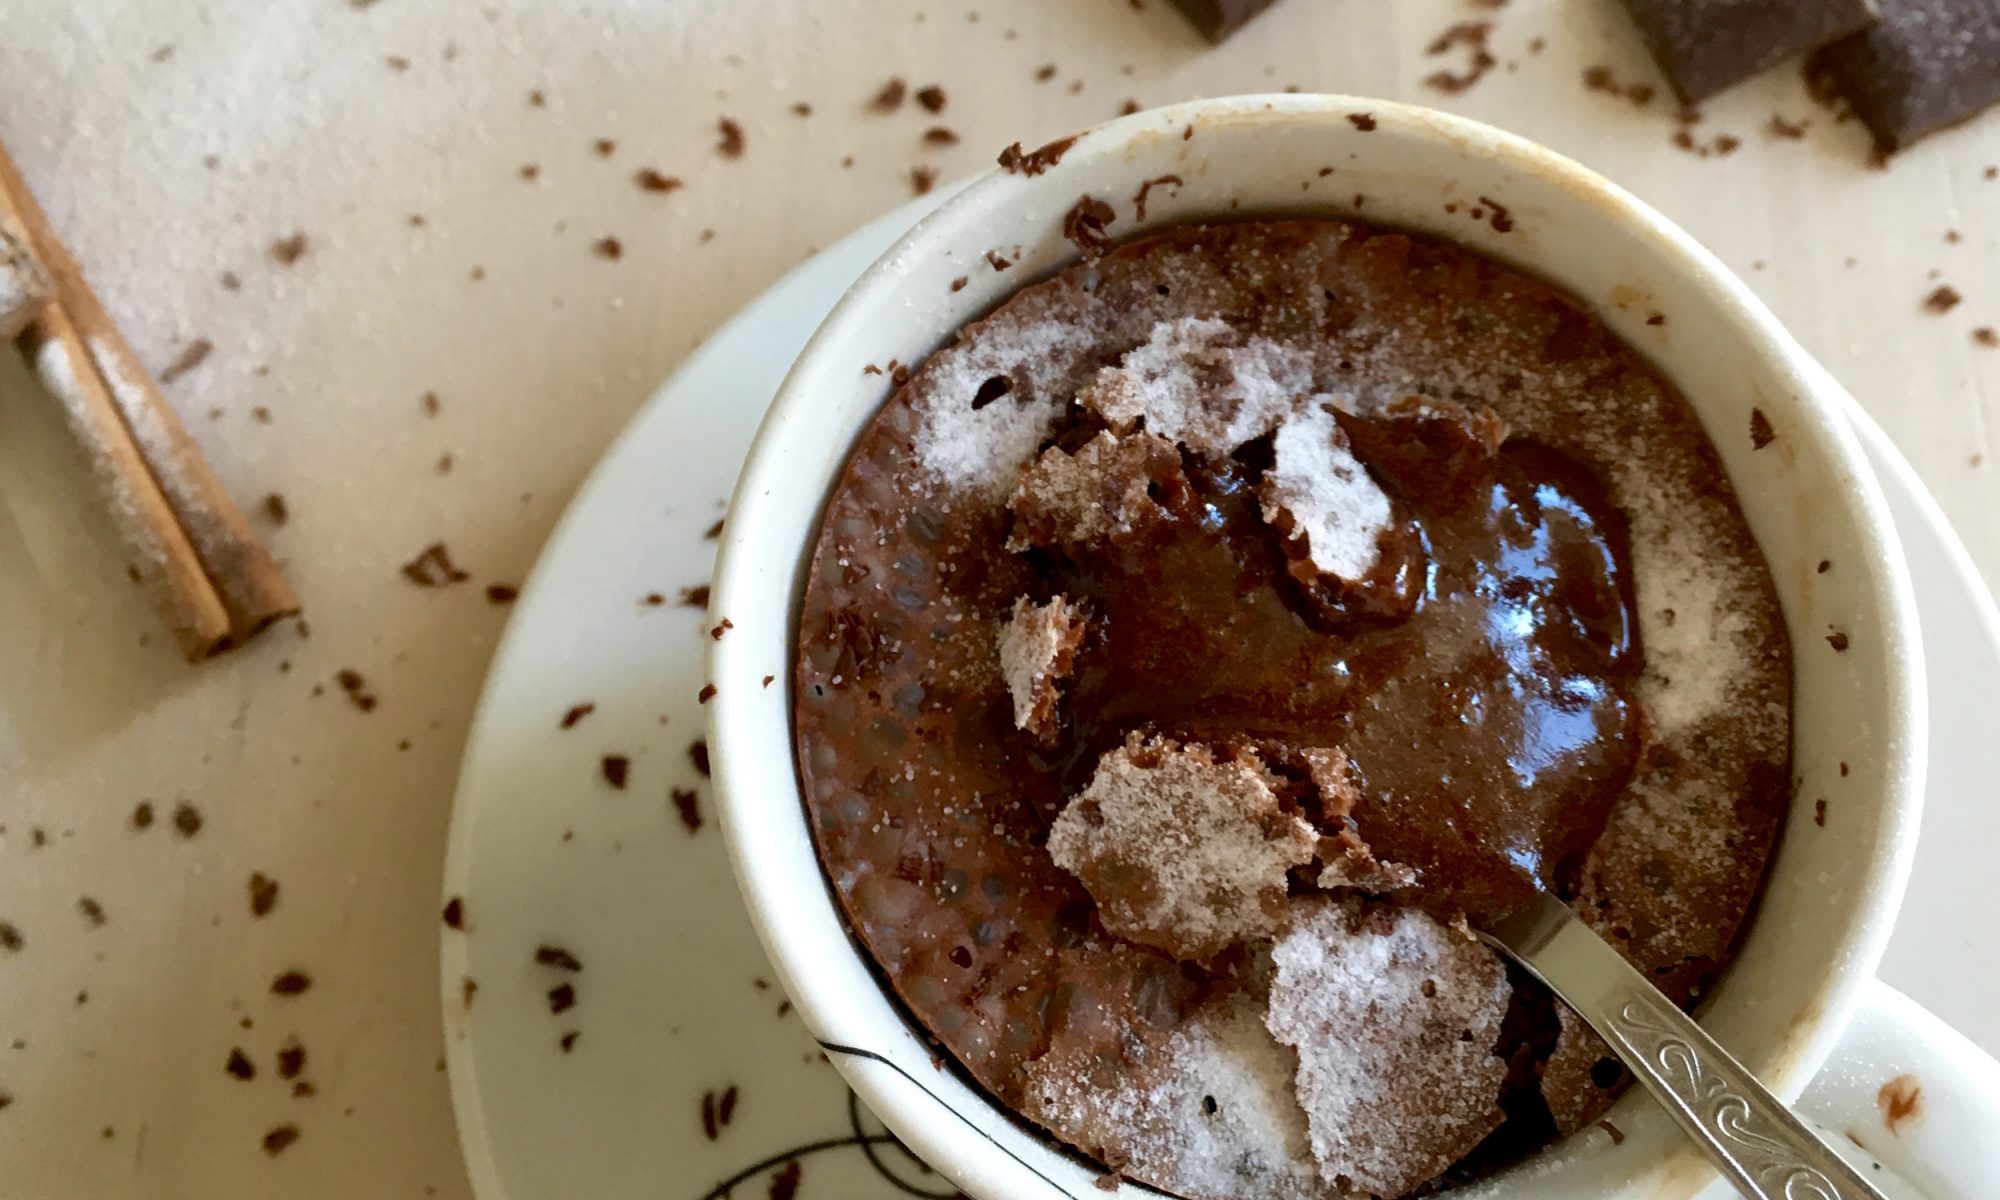 15 Unexpected Ways to Use Hot Chocolate Mix